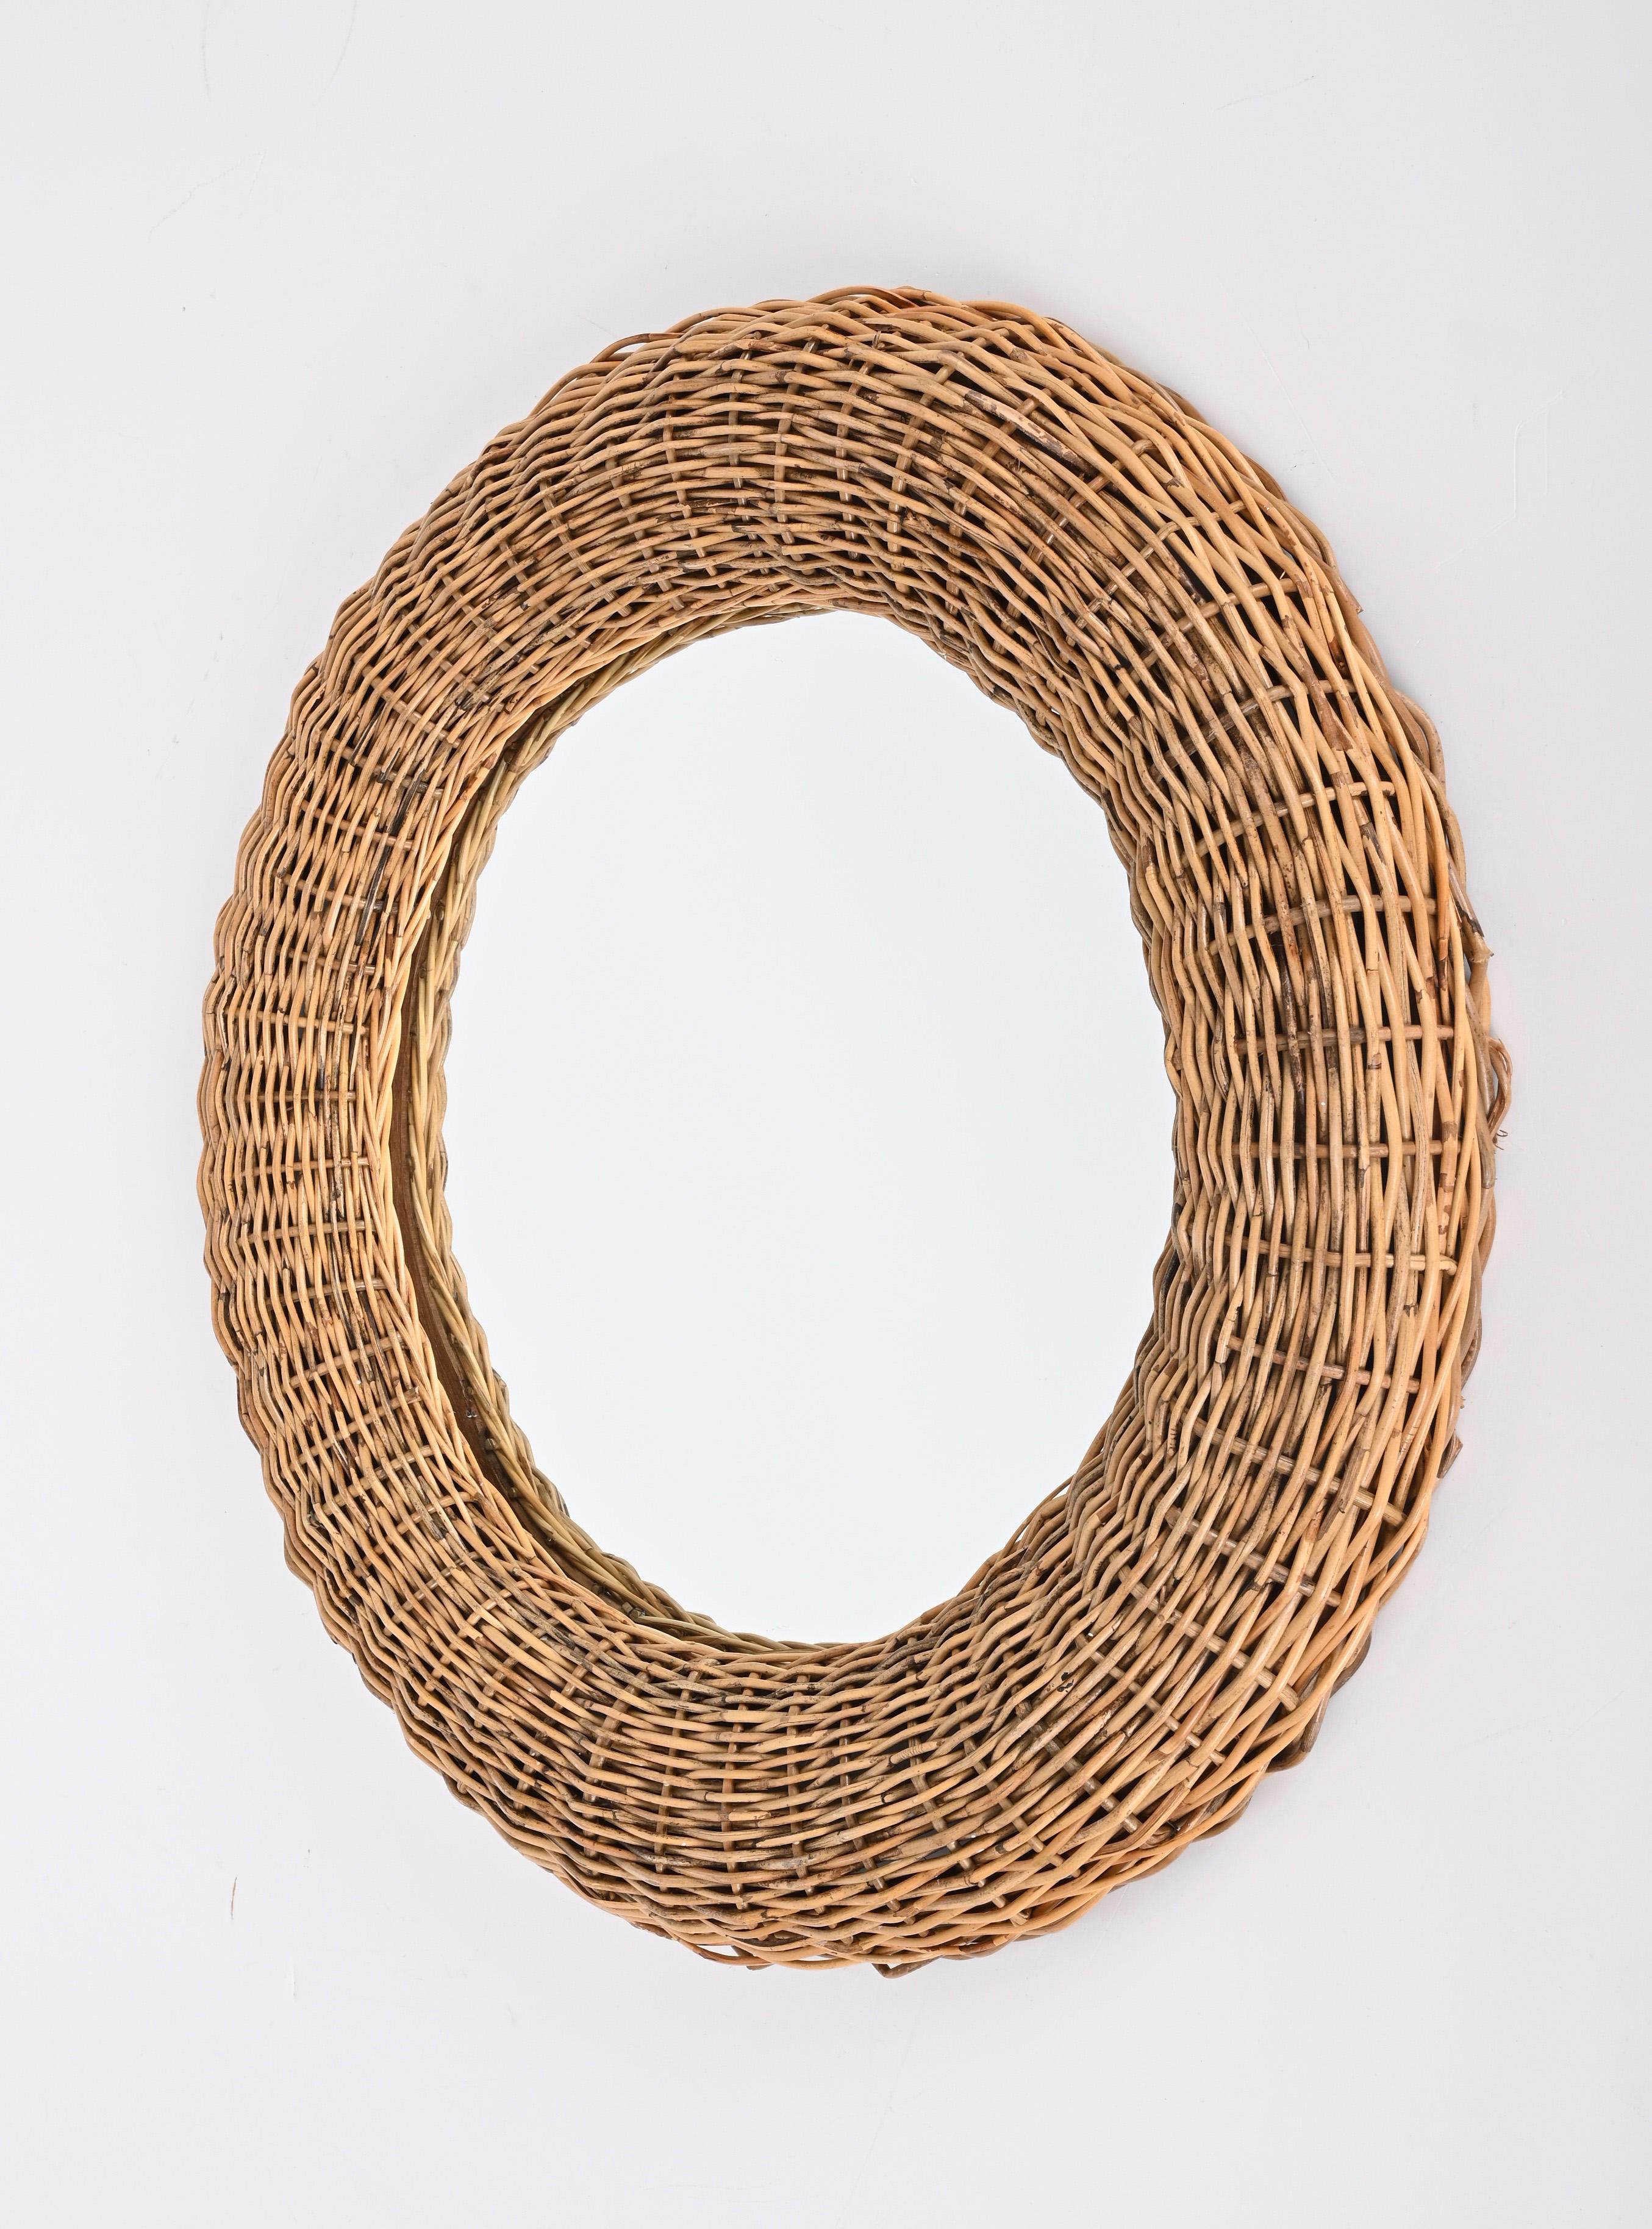 Amazing Mid-Century Modern wicker rattan round wall mirror. This fantastic piece was designed in Italy during the 1970s in the style of Franco Albini.

This item is wonderful as it is designed with rattan that is shaped in a round and perfect